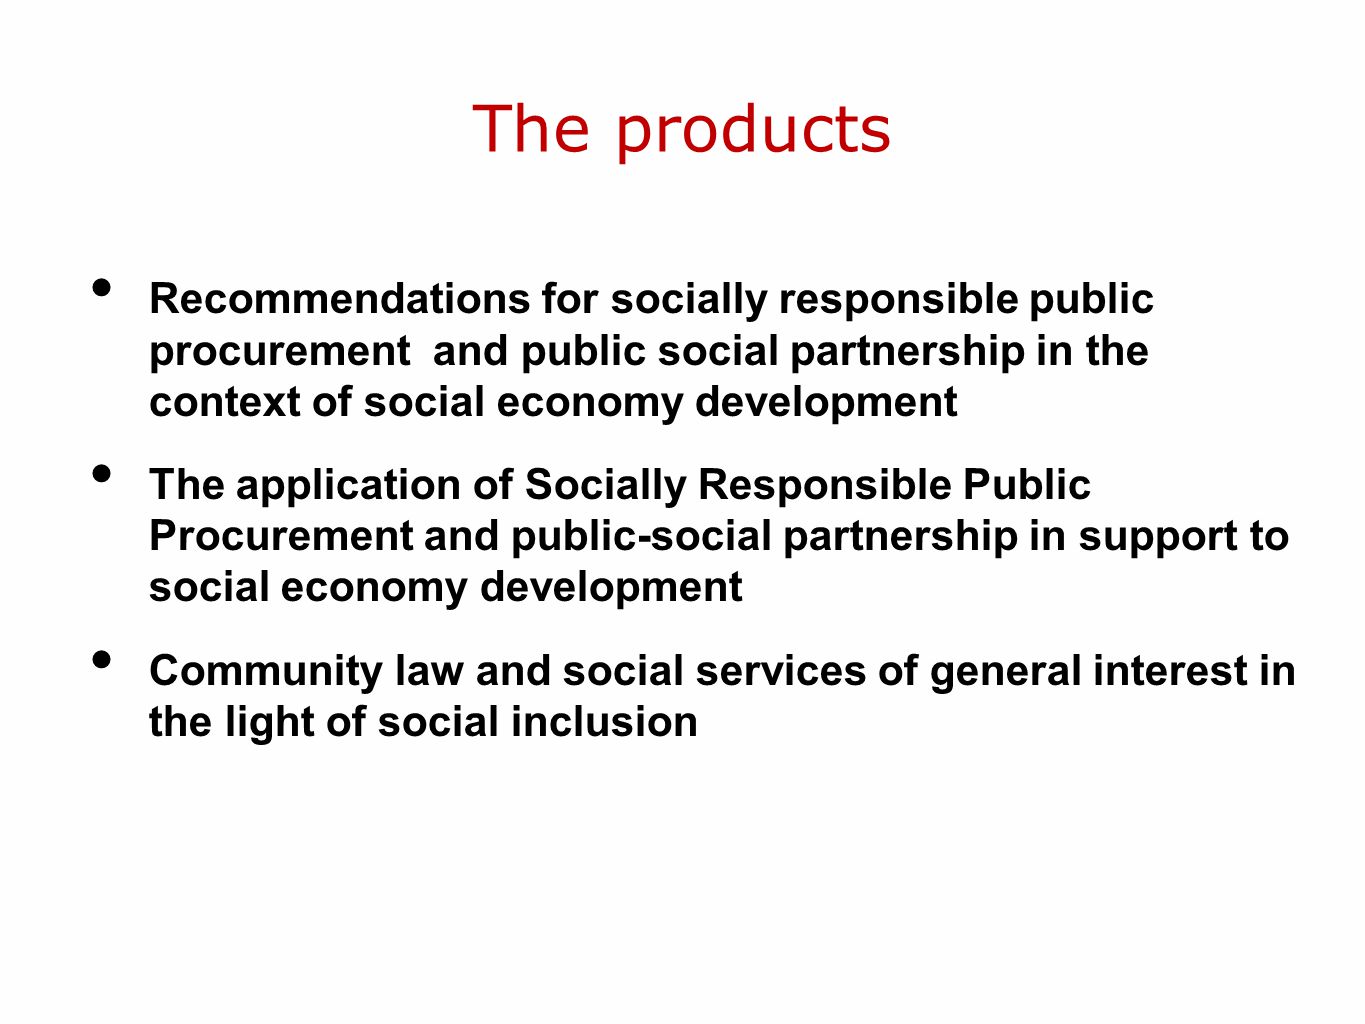 The products Recommendations for socially responsible public procurement and public social partnership in the context of social economy development The application of Socially Responsible Public Procurement and public-social partnership in support to social economy development Community law and social services of general interest in the light of social inclusion